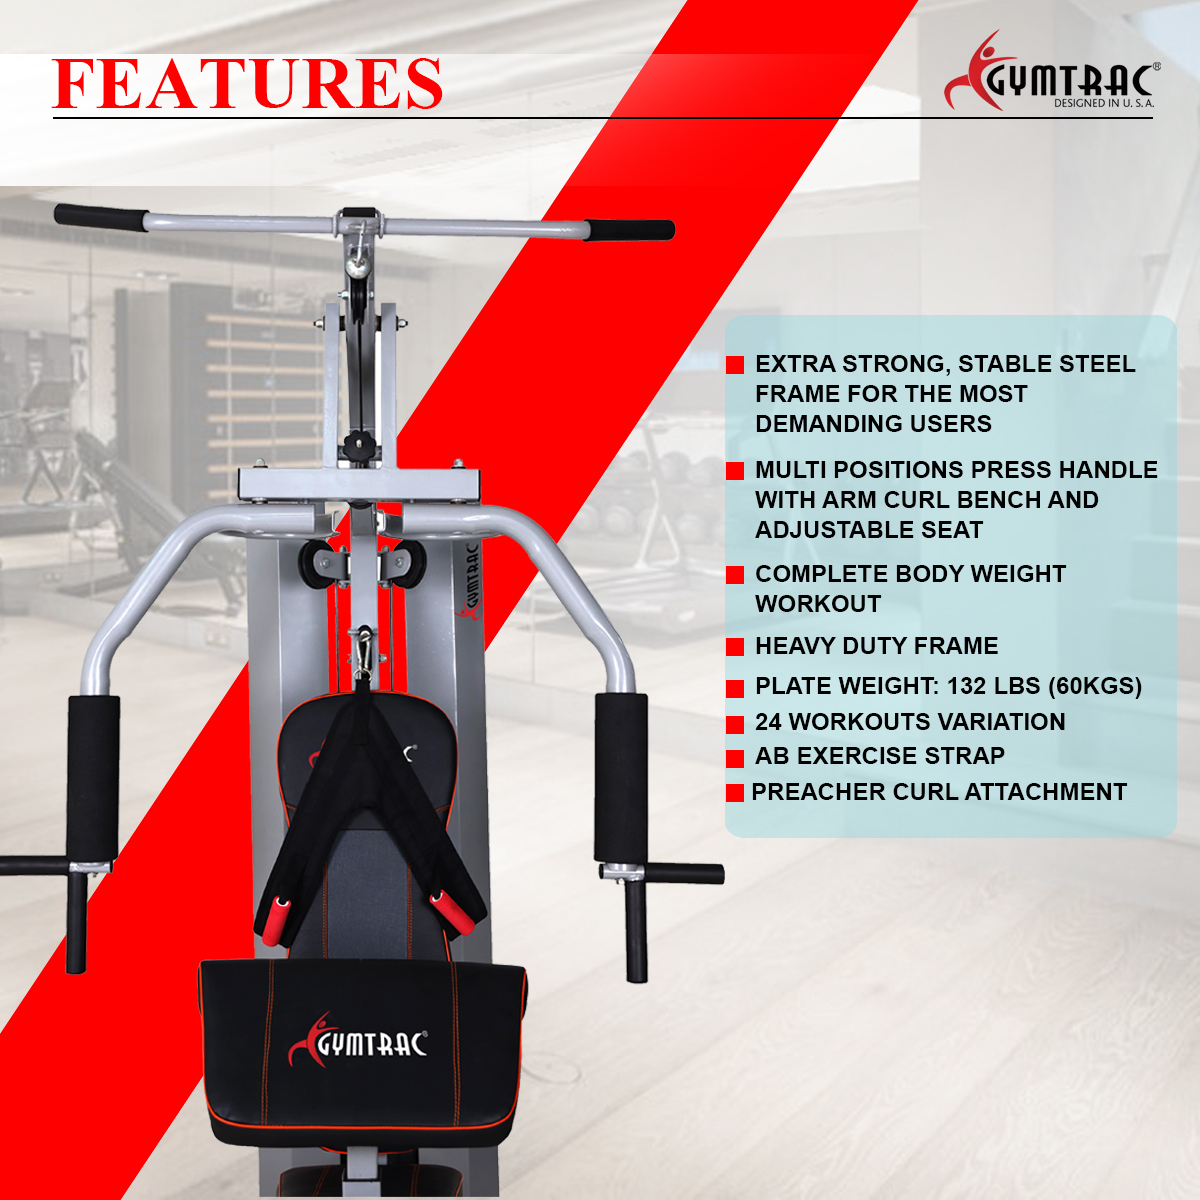 GYMTRAC KH 150 HOME GYM WITH SHOULDER